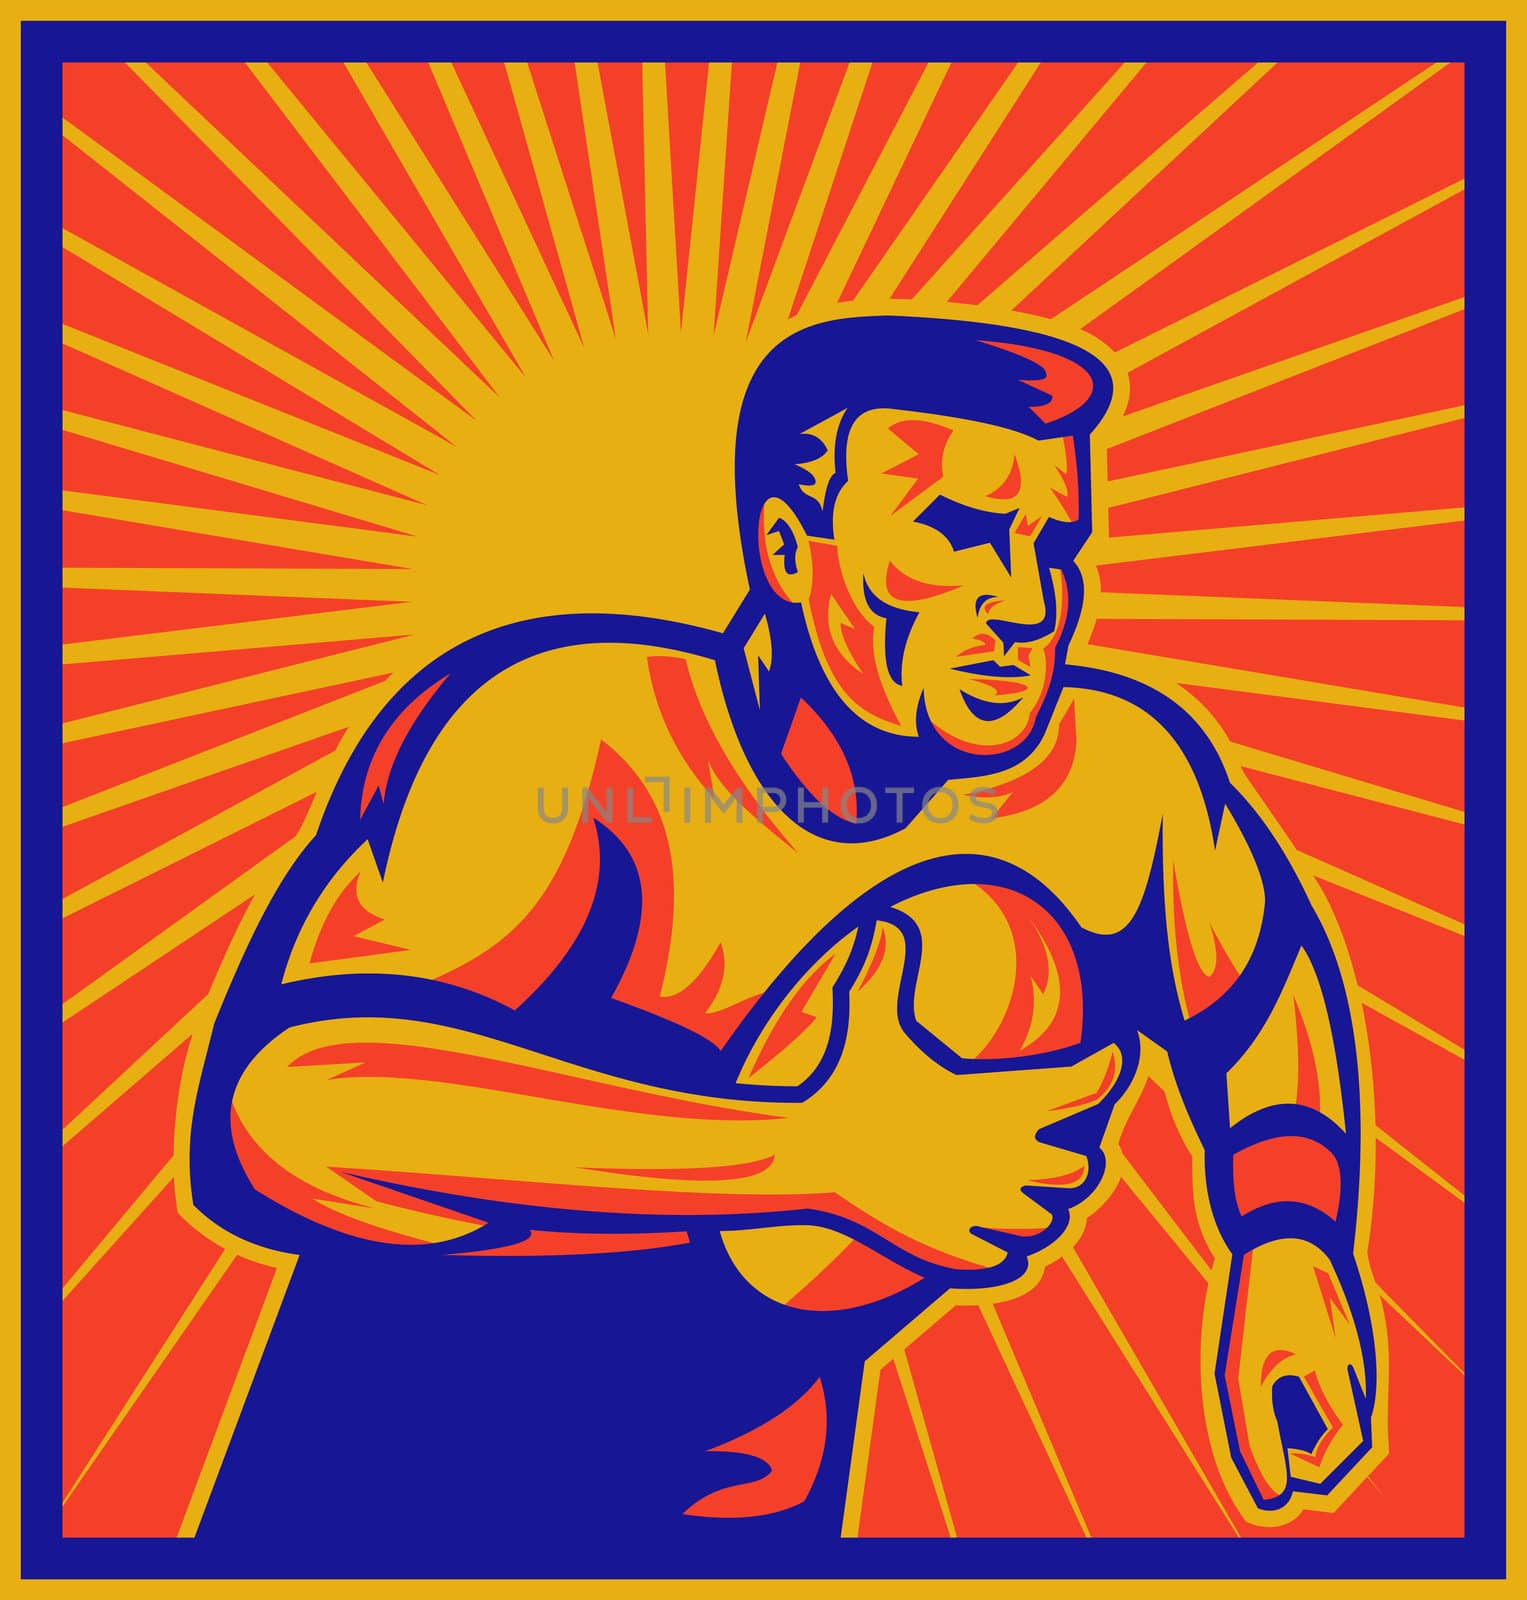 illustration of a rugby player running with ball with sunburst in background done in retro woodcut style